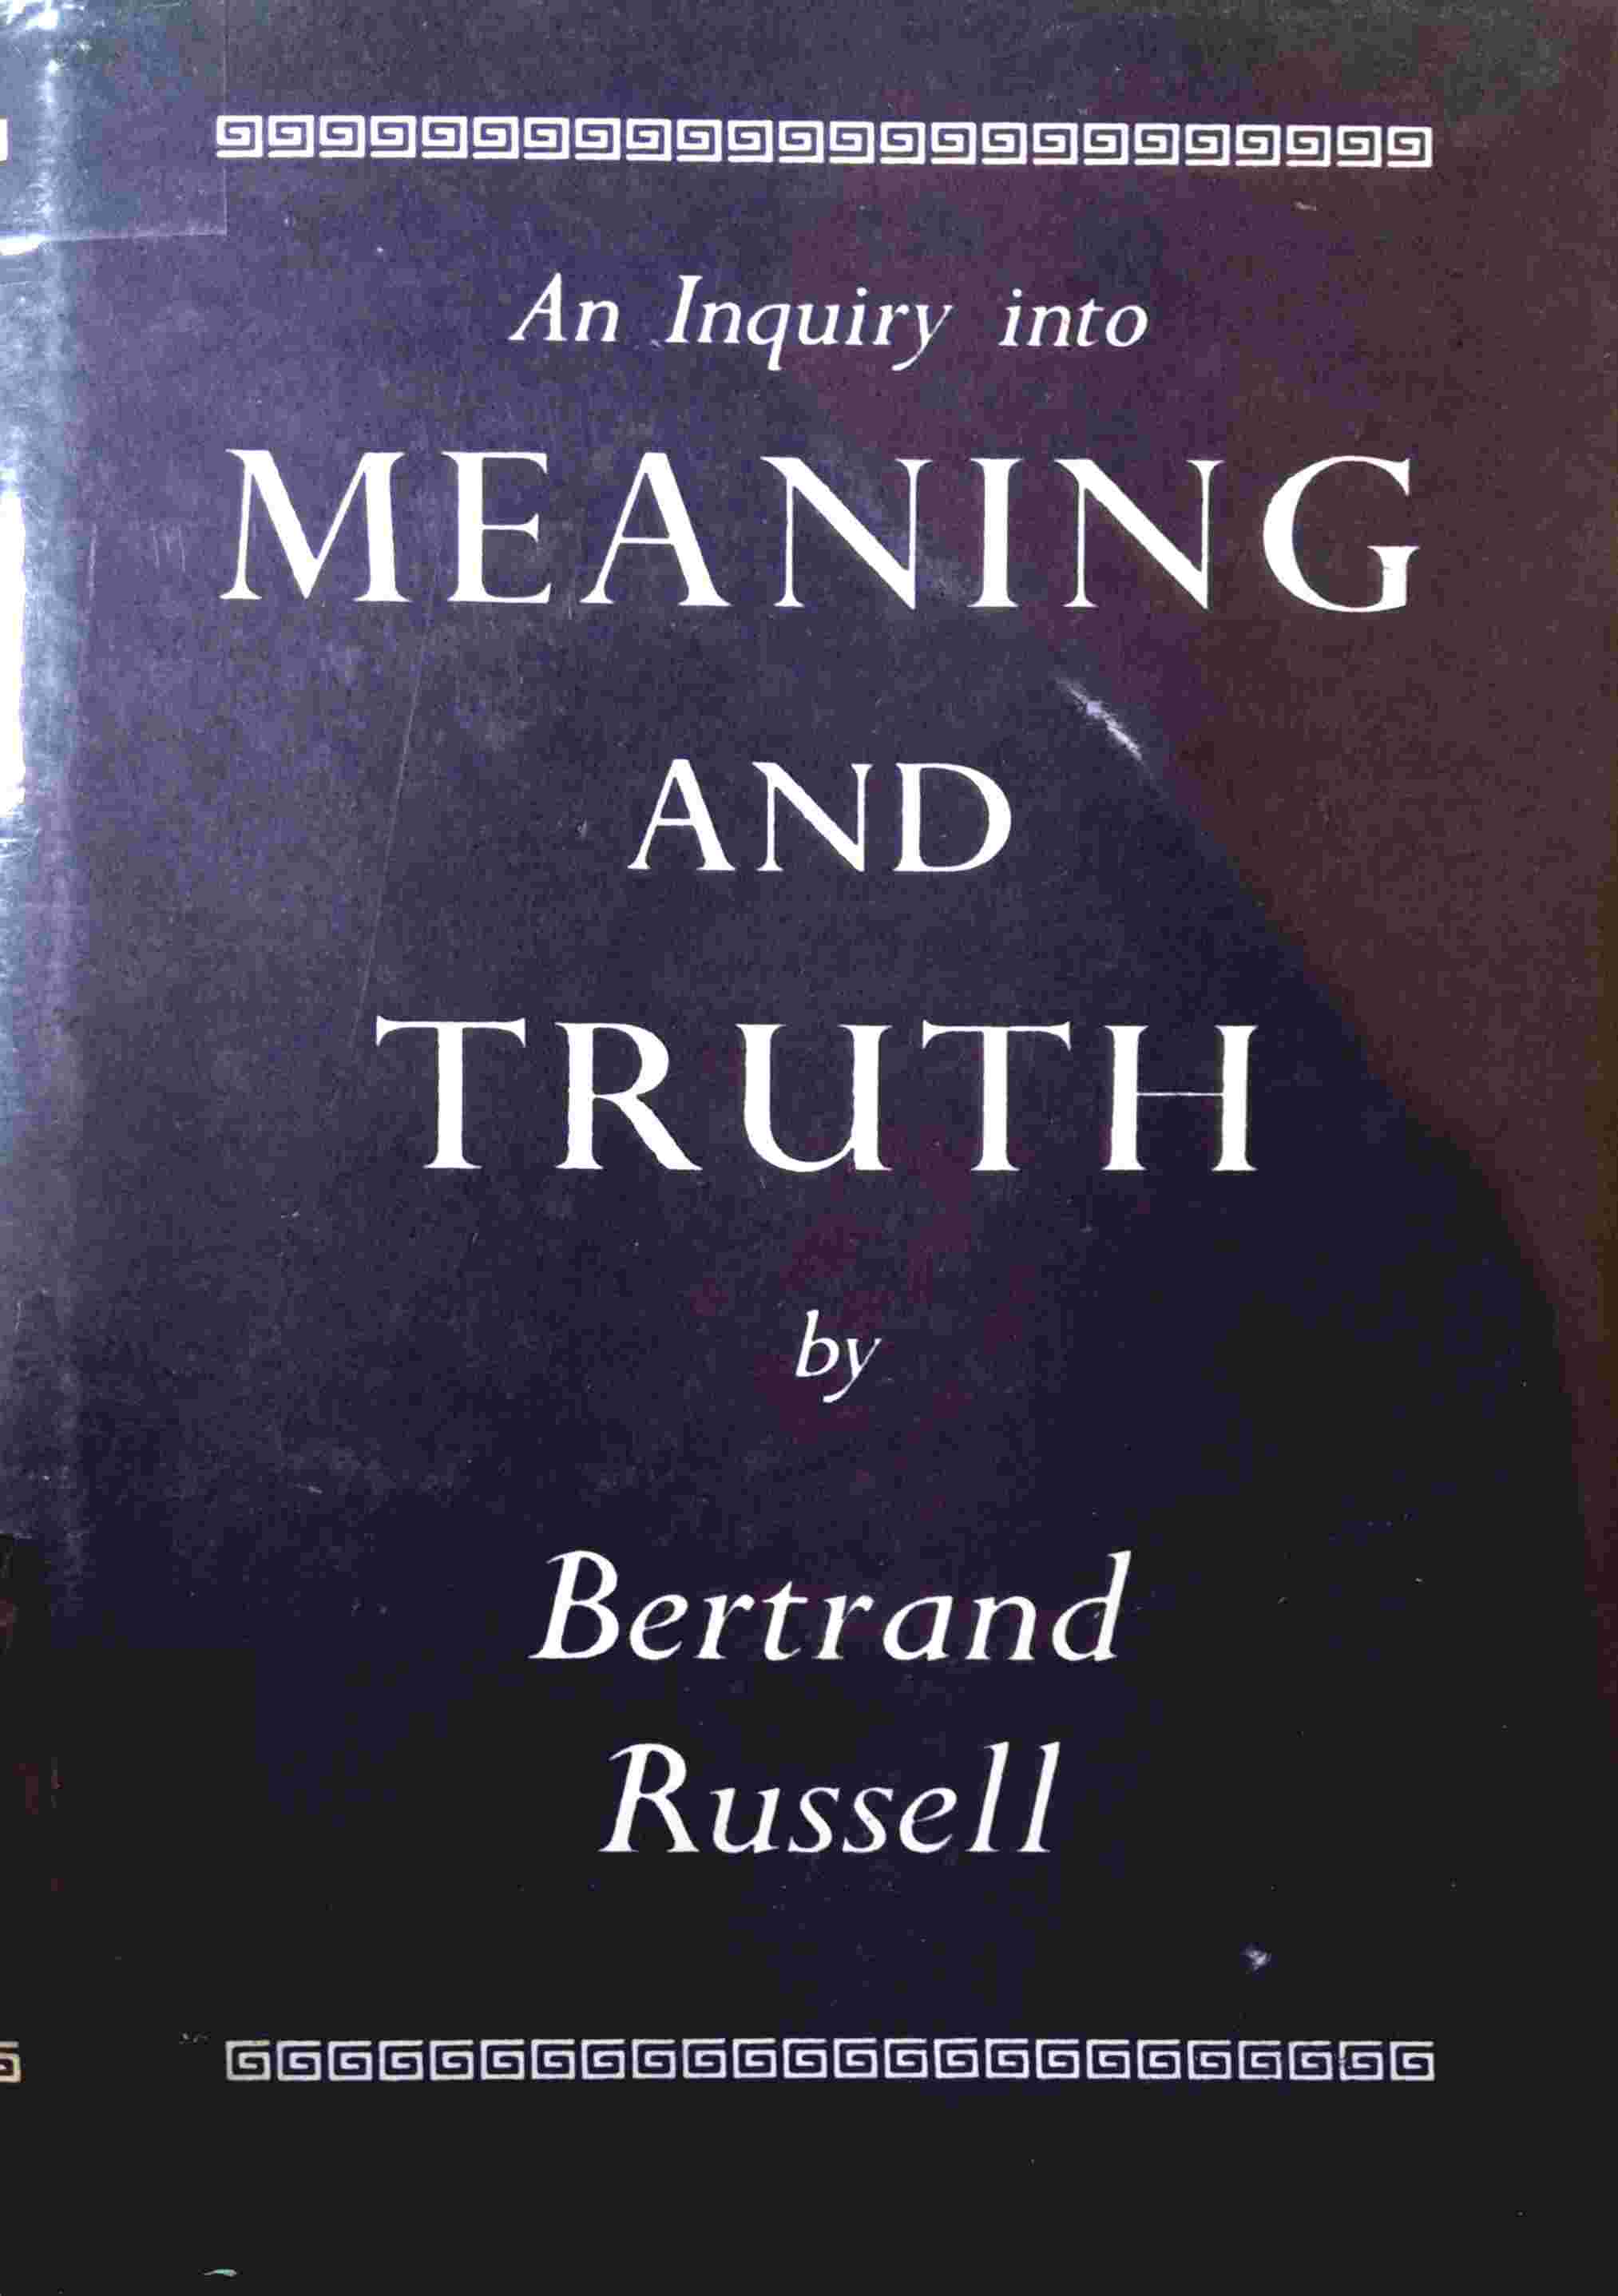 AN INQUIRY INTO MEANING AND TRUTH